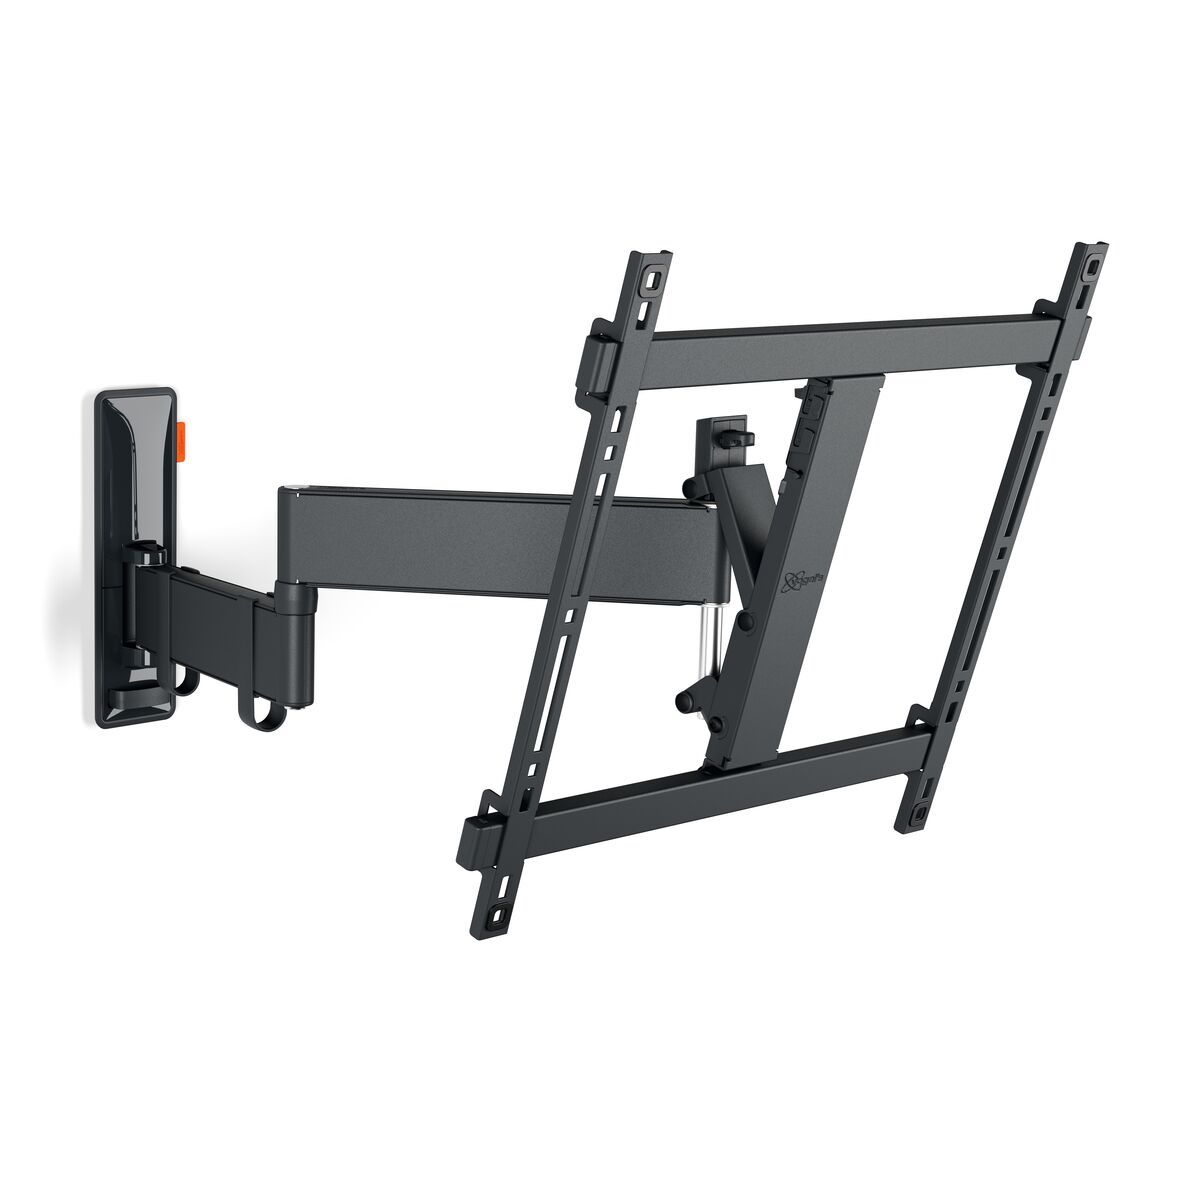 Vogel's TVM 3443 Full-Motion TV Wall Mount (black) - Suitable for 32 up to 65 inch TVs - Full motion (up to 180°) swivel - Tilt up to 20° - Product